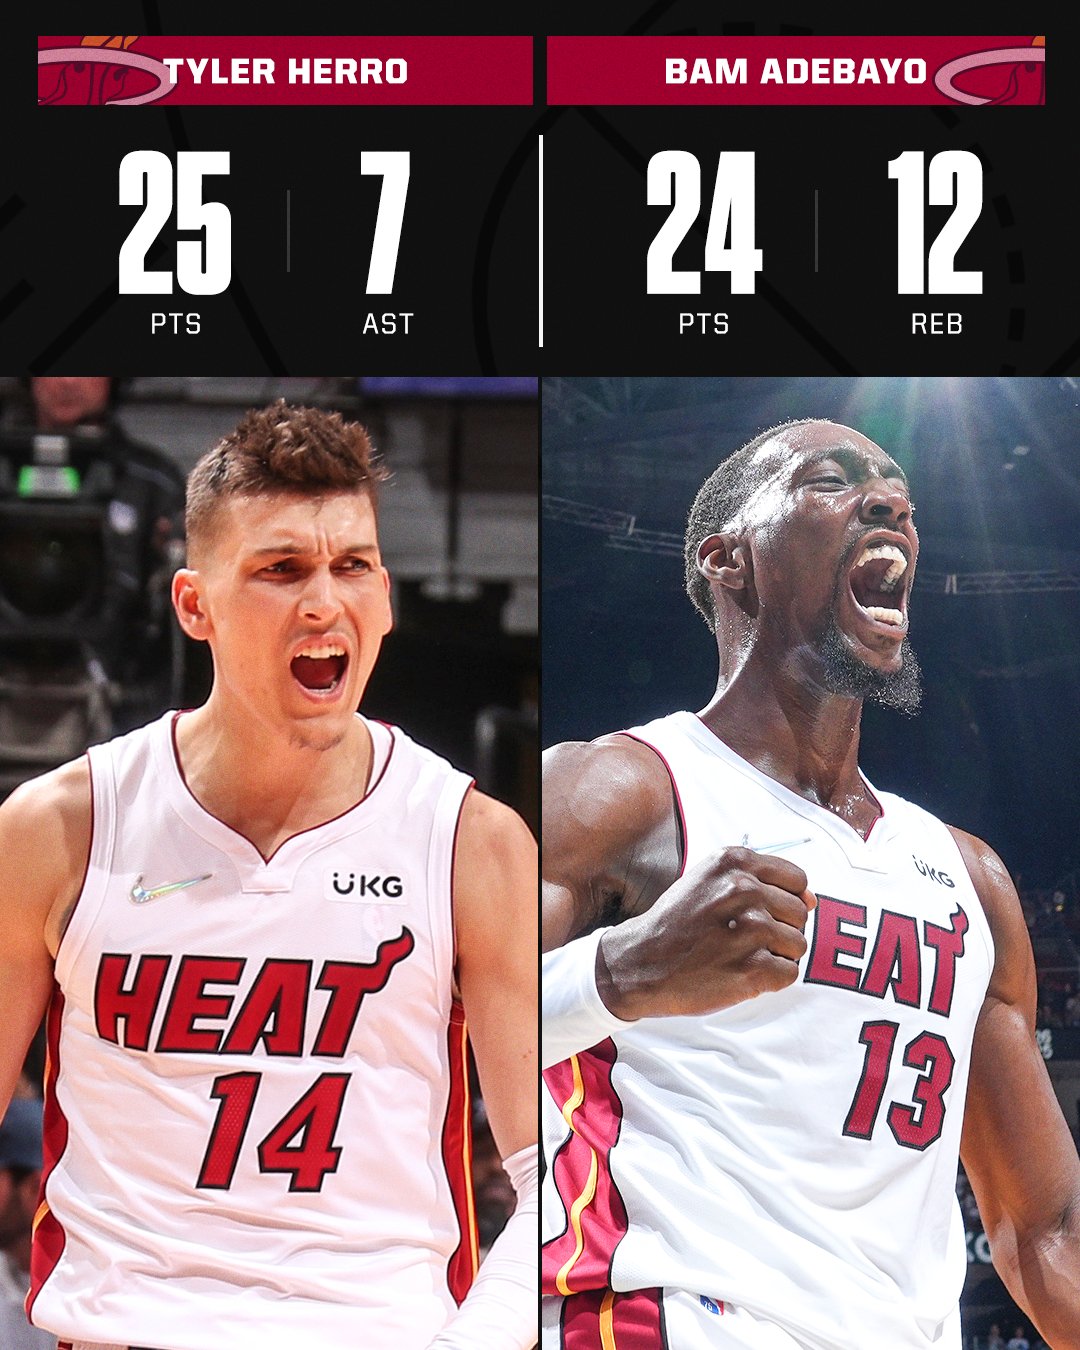 NBA Memes - Tyler Herro before and after 😂